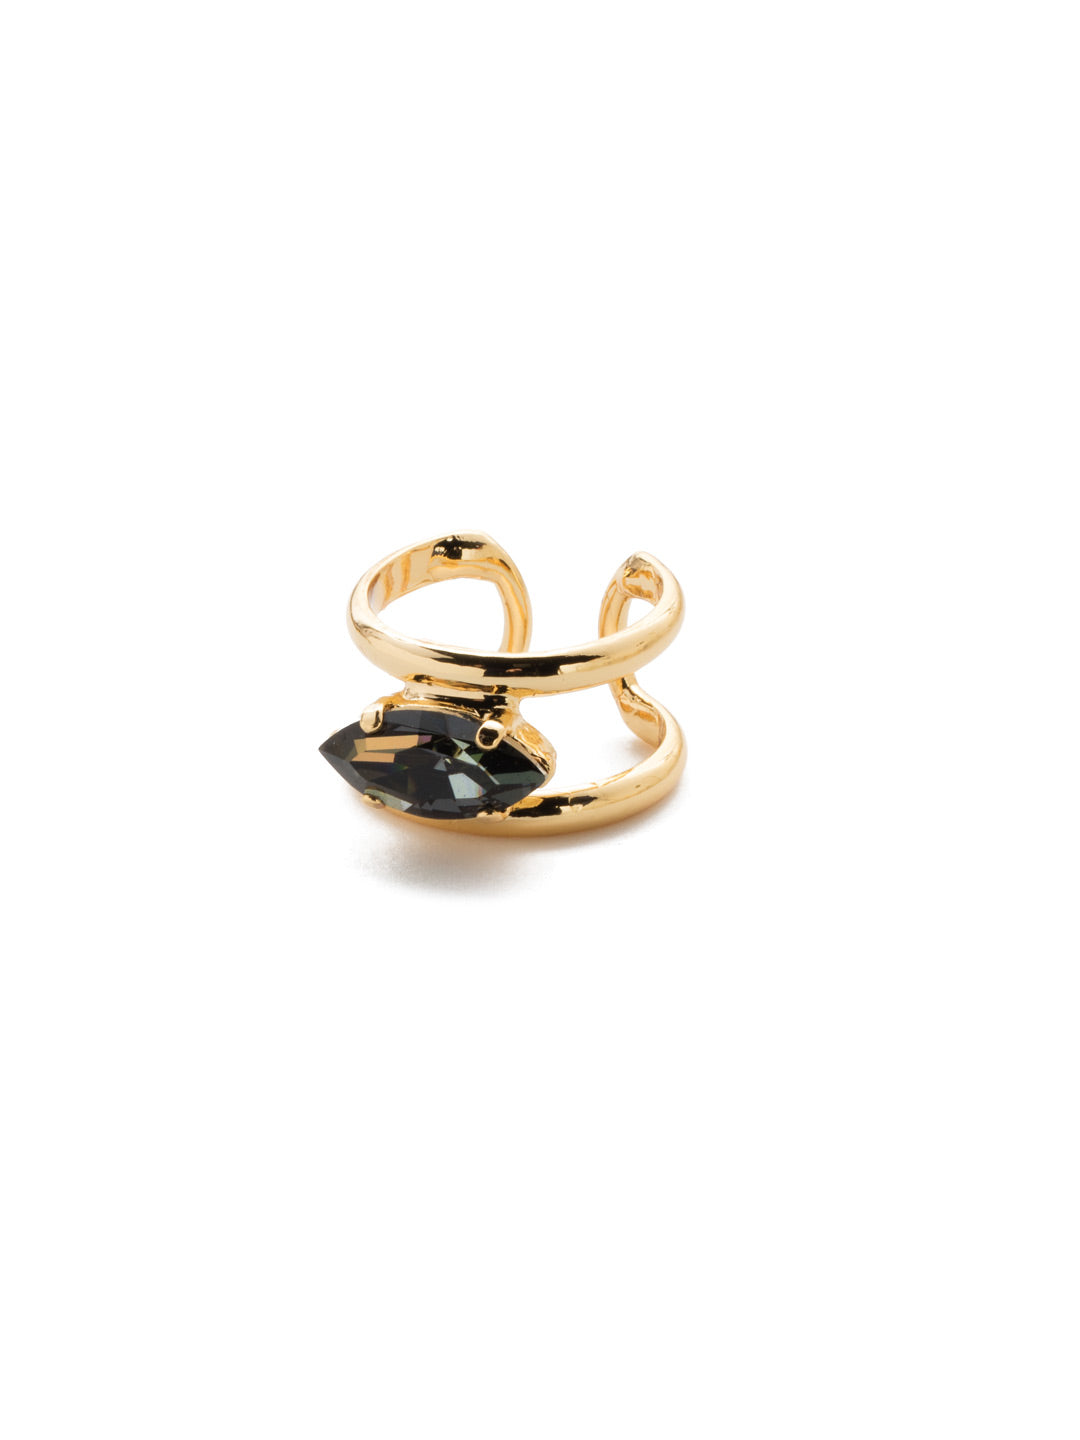 Camille Stacked Ring - REP7BGCSM - The Camille Stacked Ring is shiny, airy and sparkly. A trifecta. The sleek metal band's open space makes room for a center, show-stopping navette crystal that's sure to get noticed. From Sorrelli's Cashmere collection in our Bright Gold-tone finish.